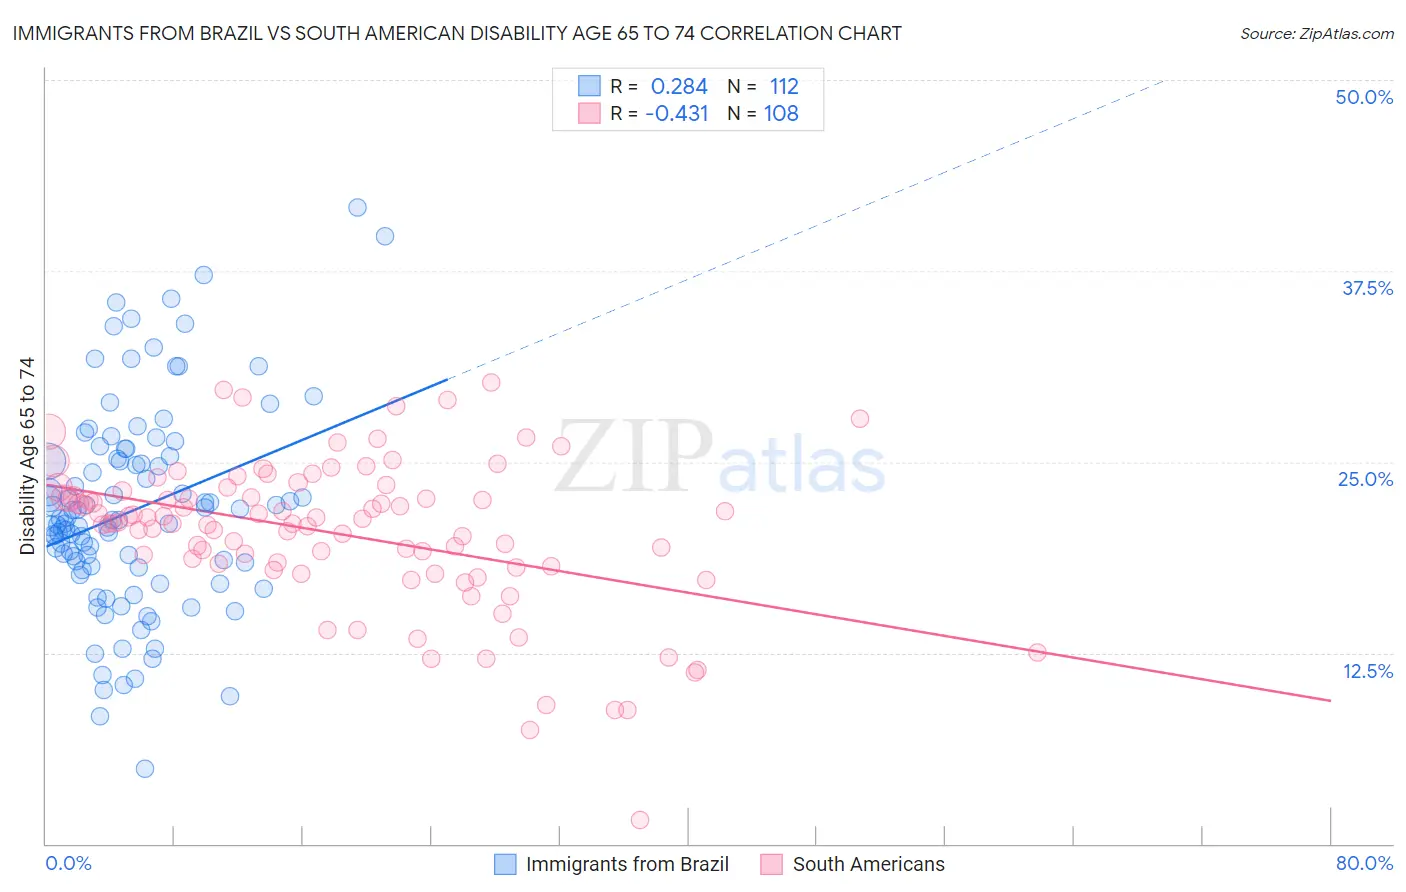 Immigrants from Brazil vs South American Disability Age 65 to 74